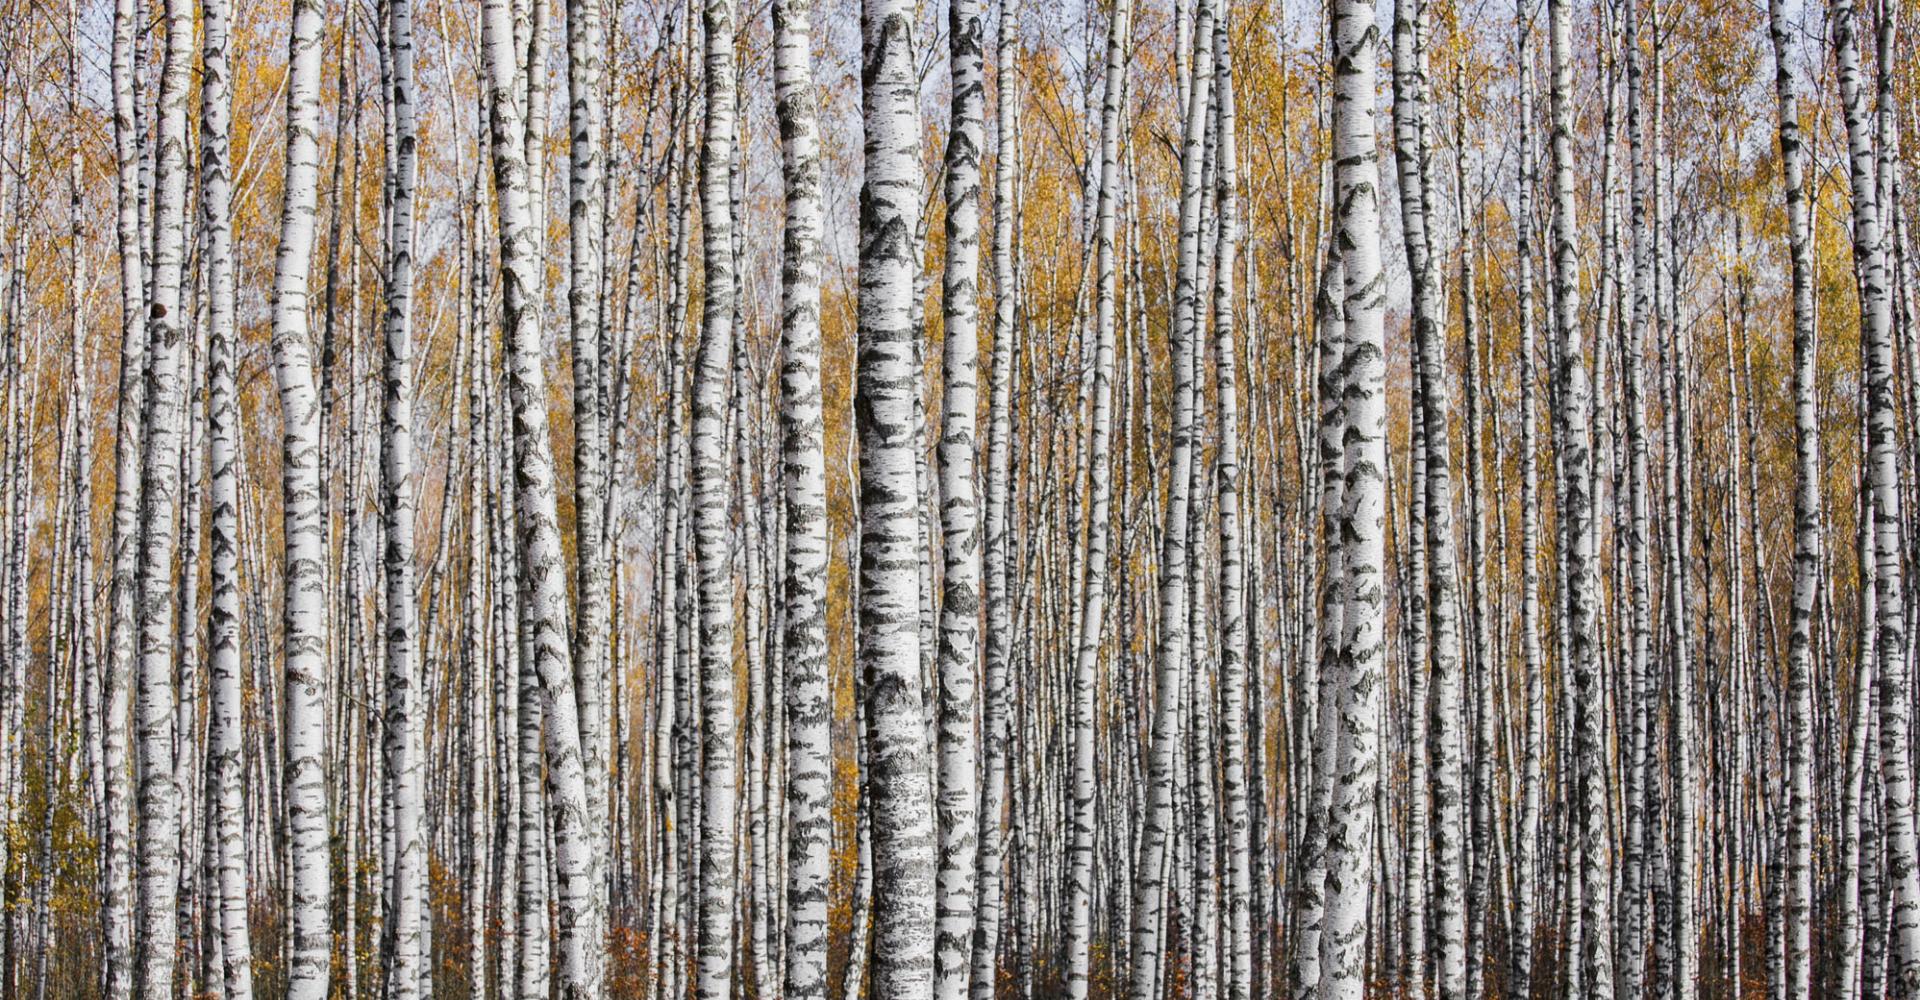 Birch forest, close up on trunks